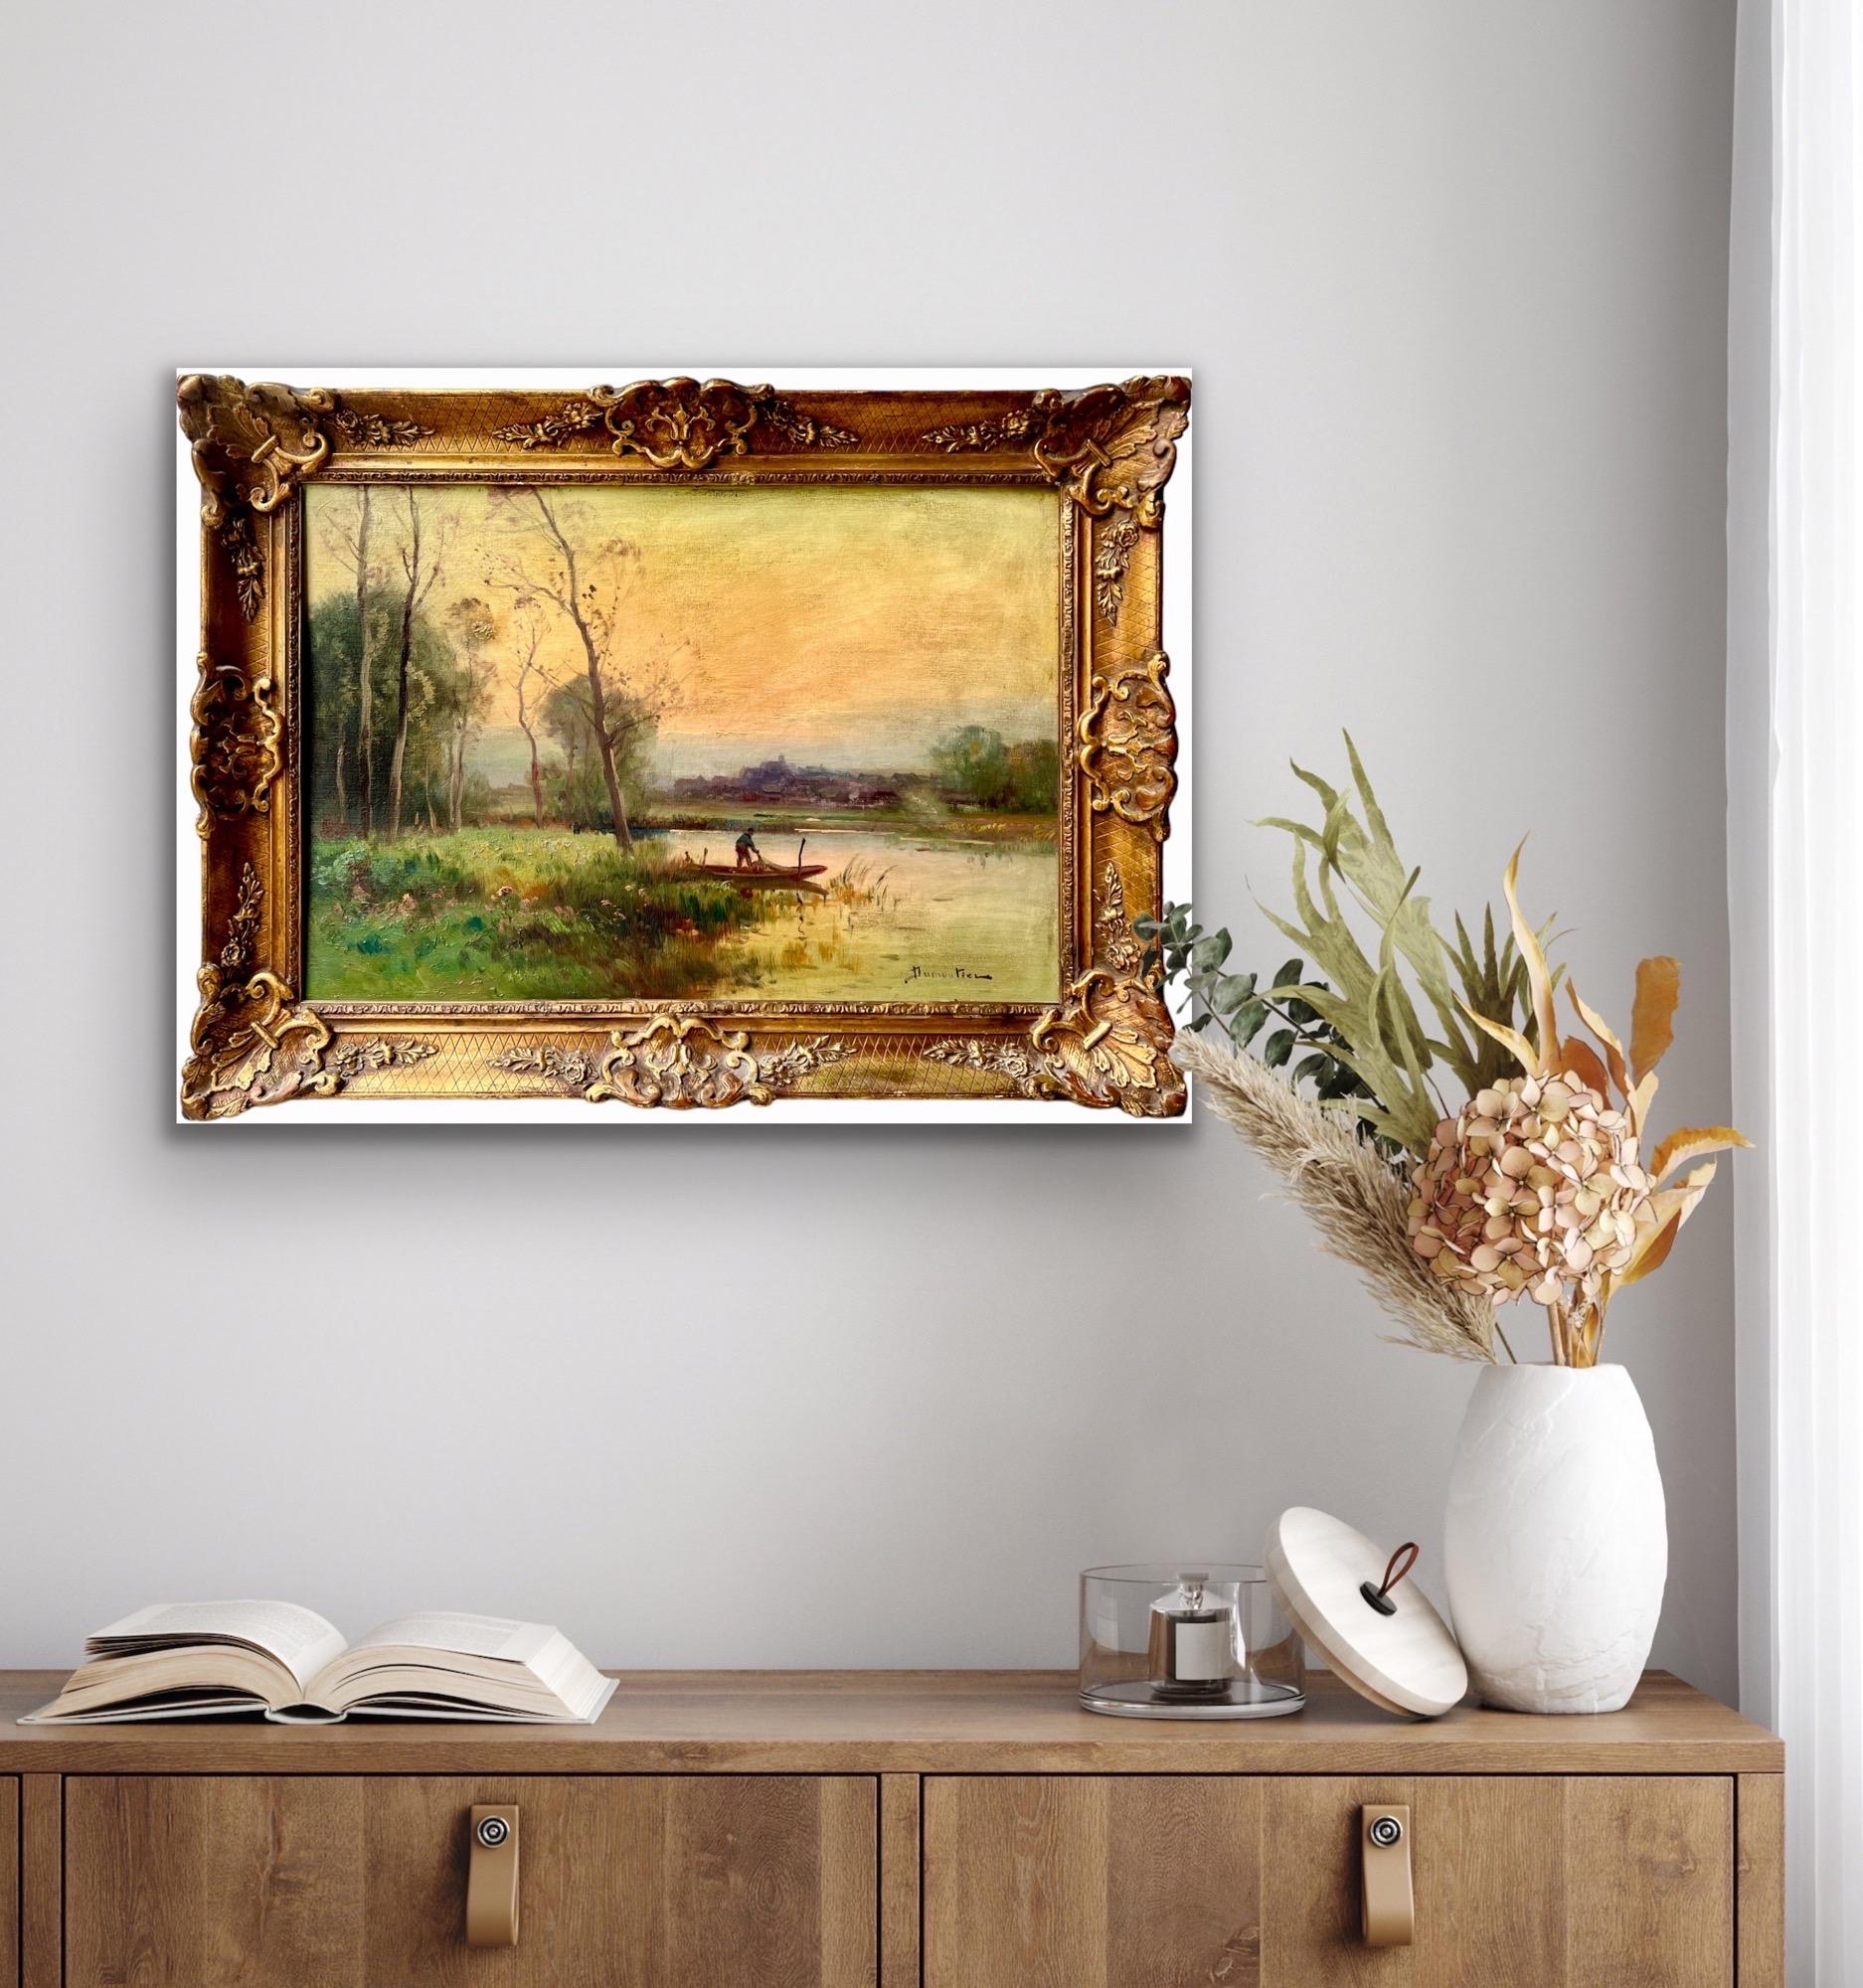 19th century French oil painting depicting a Fisherman returning home in a peaceful countryside landscape

This lovely painting depicts a charming French countryside landscape at dusk on a sunny spring day. We can see blooming trees in the middle of